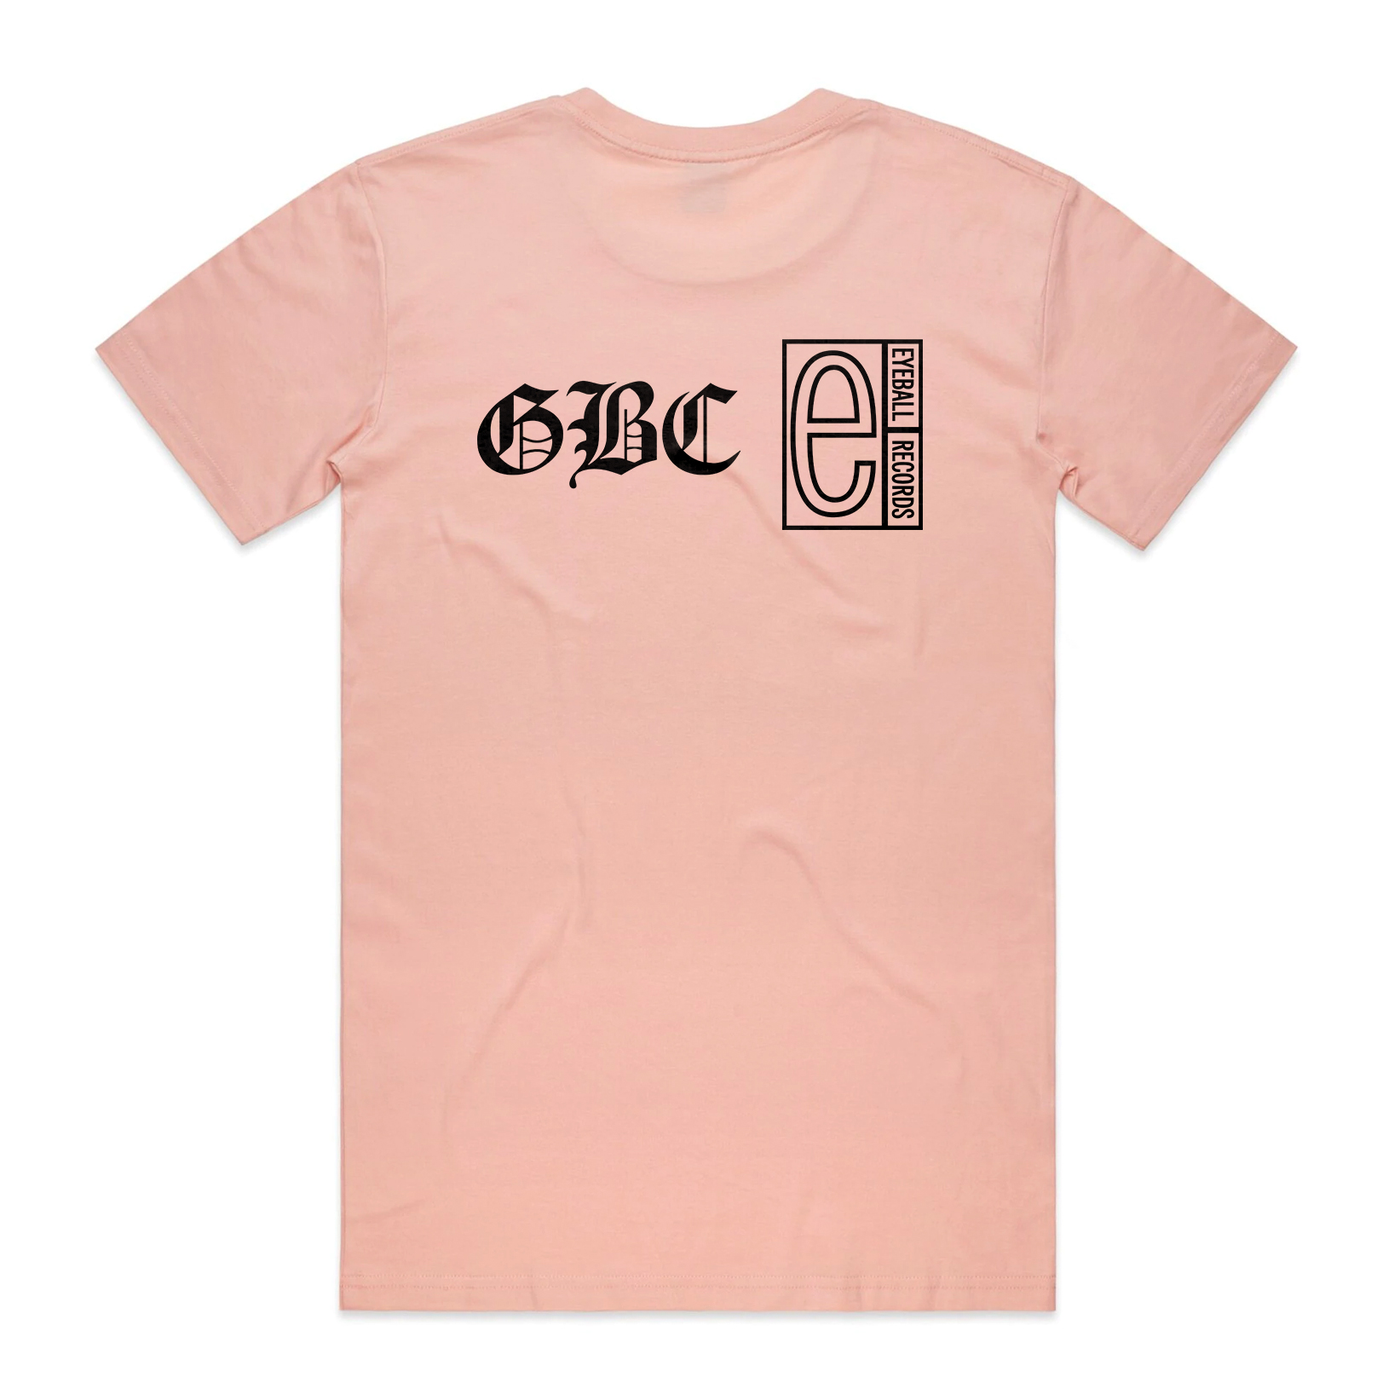 Under Your Spell Tee - Pink + Cassette